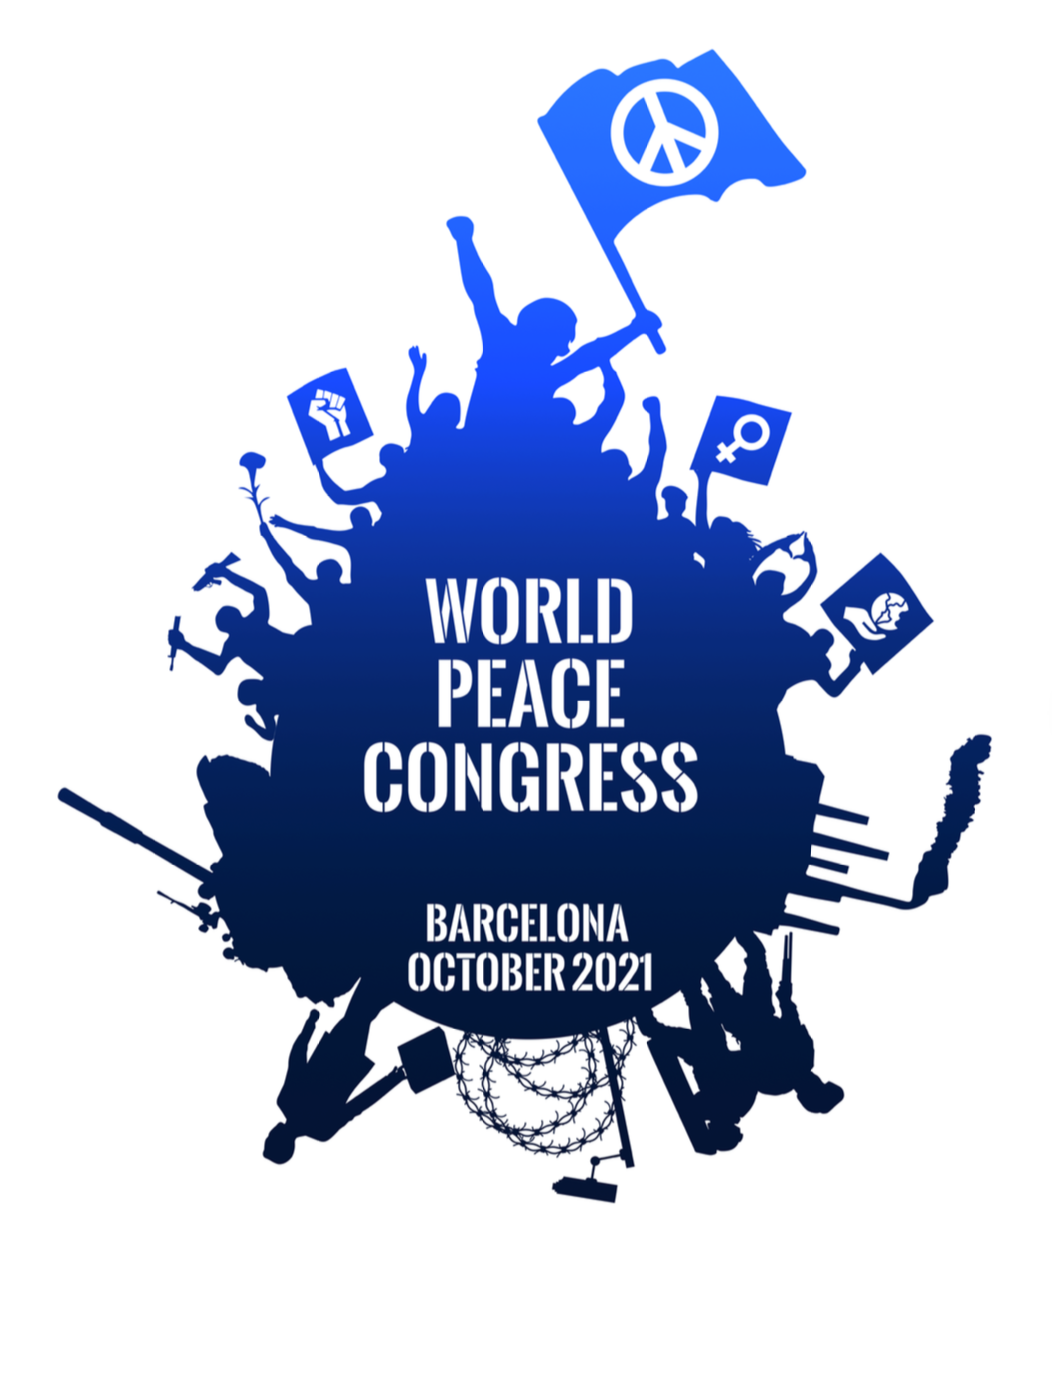 Barcelona will host the II World Peace Congress from 15-17 October